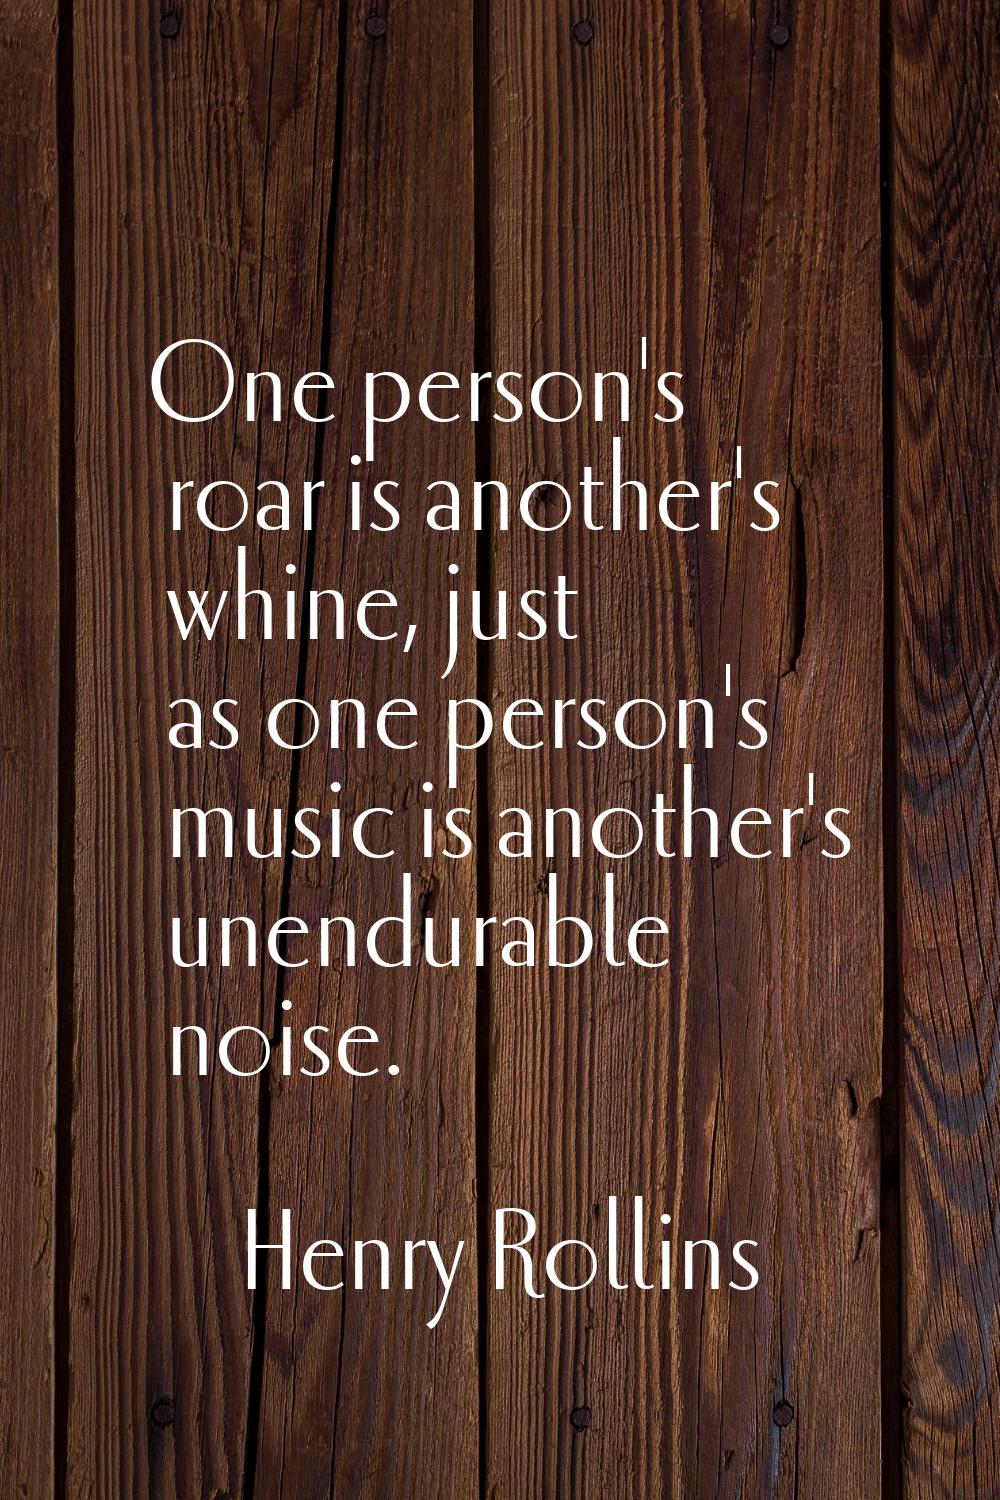 One person's roar is another's whine, just as one person's music is another's unendurable noise.